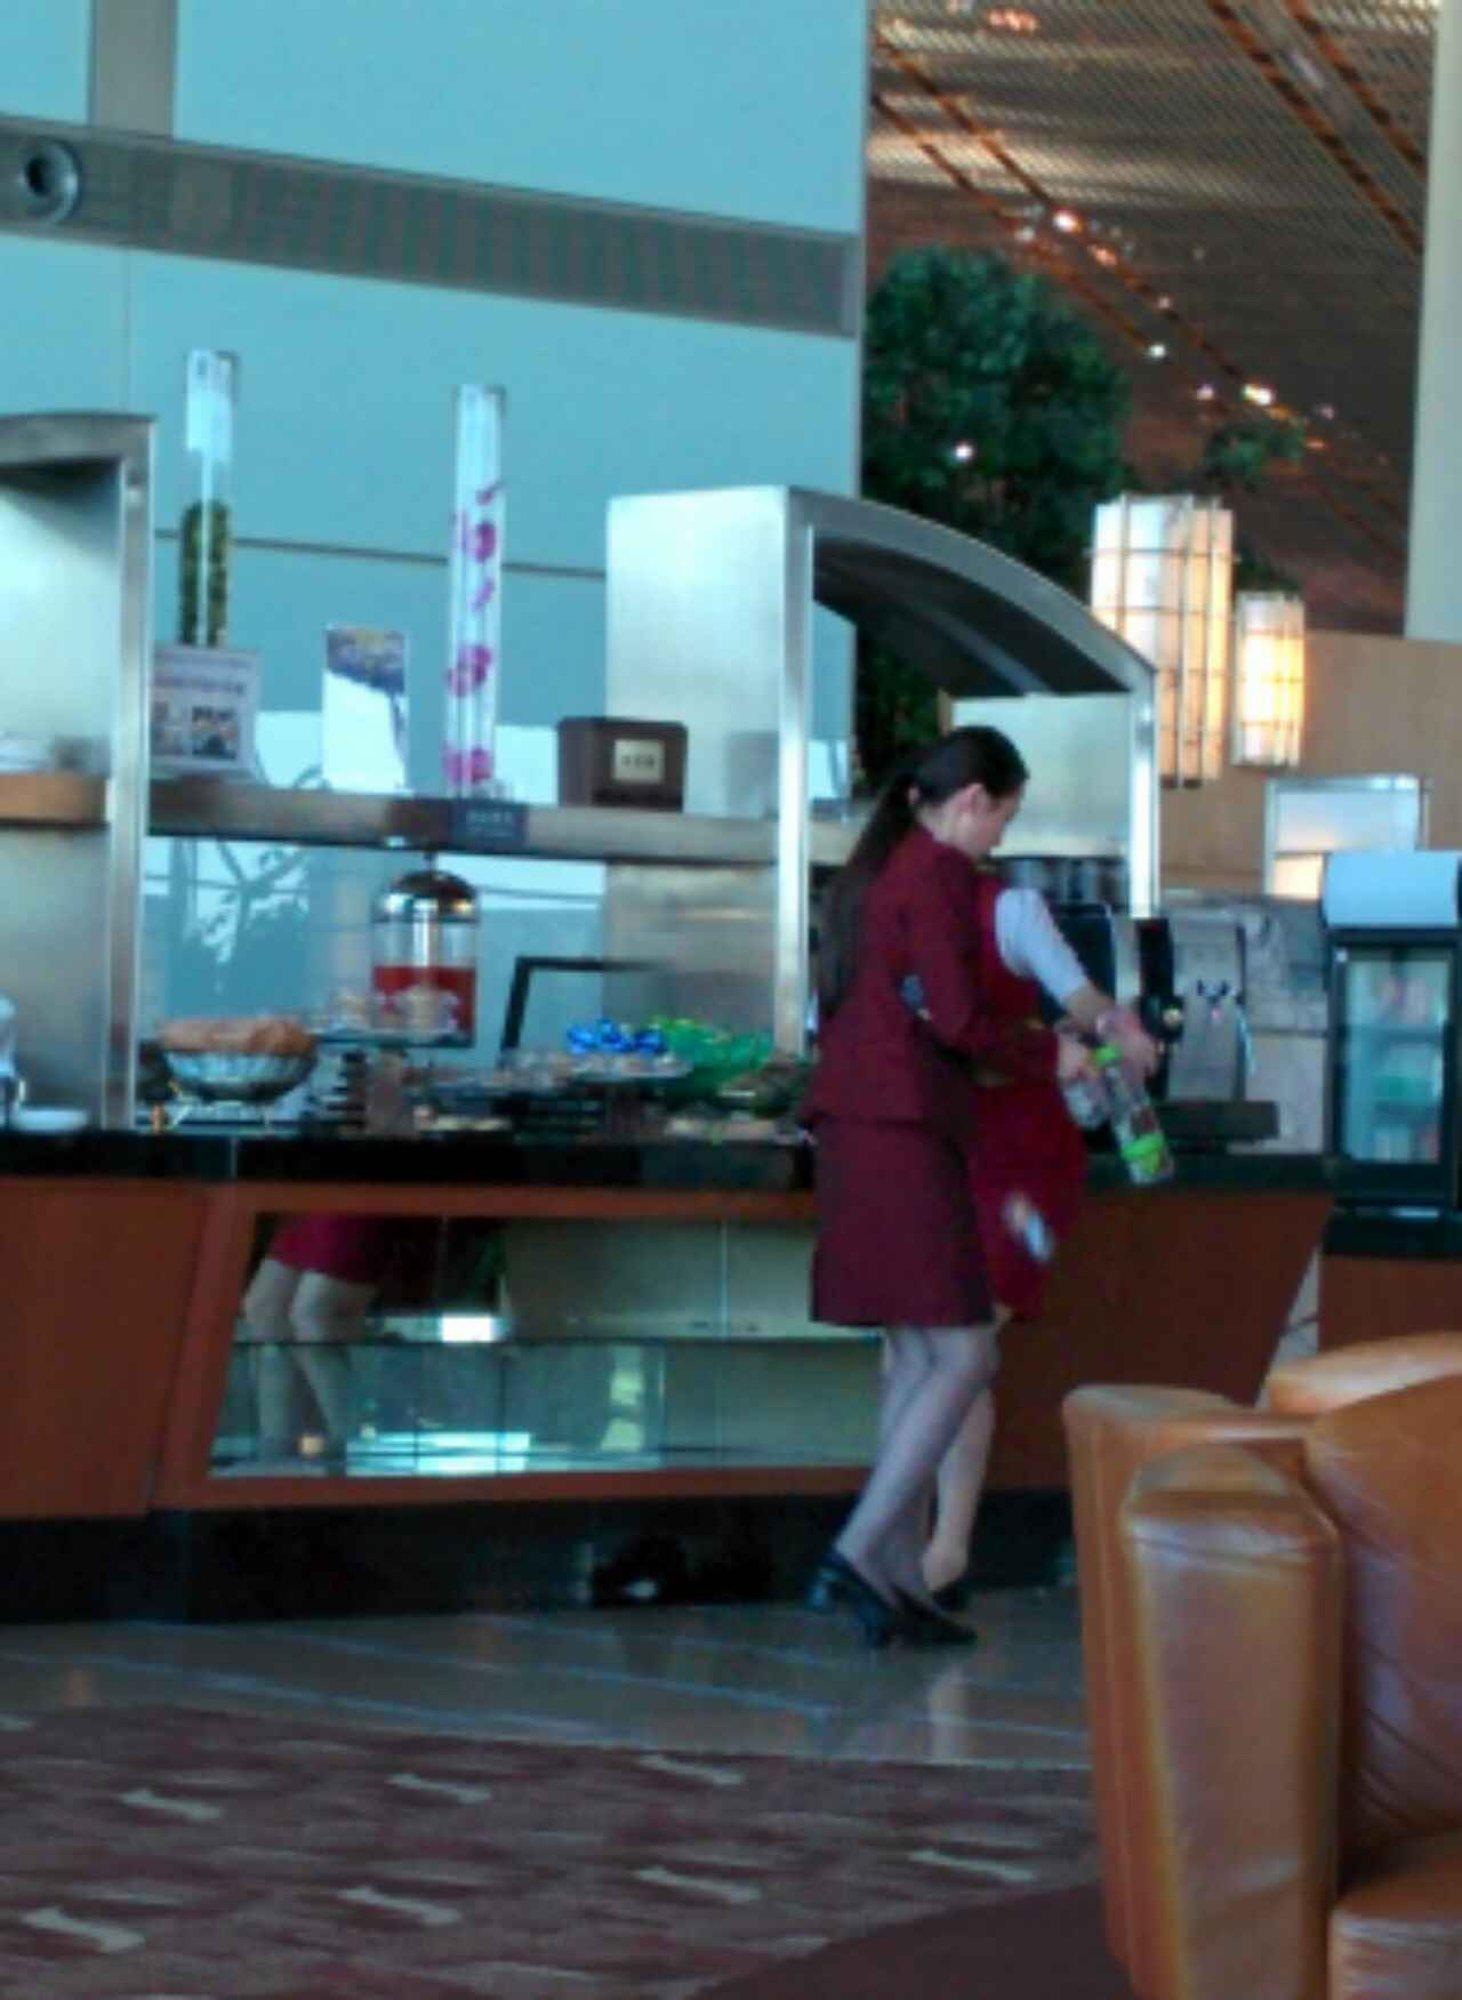 Air China International First Class Lounge image 21 of 38